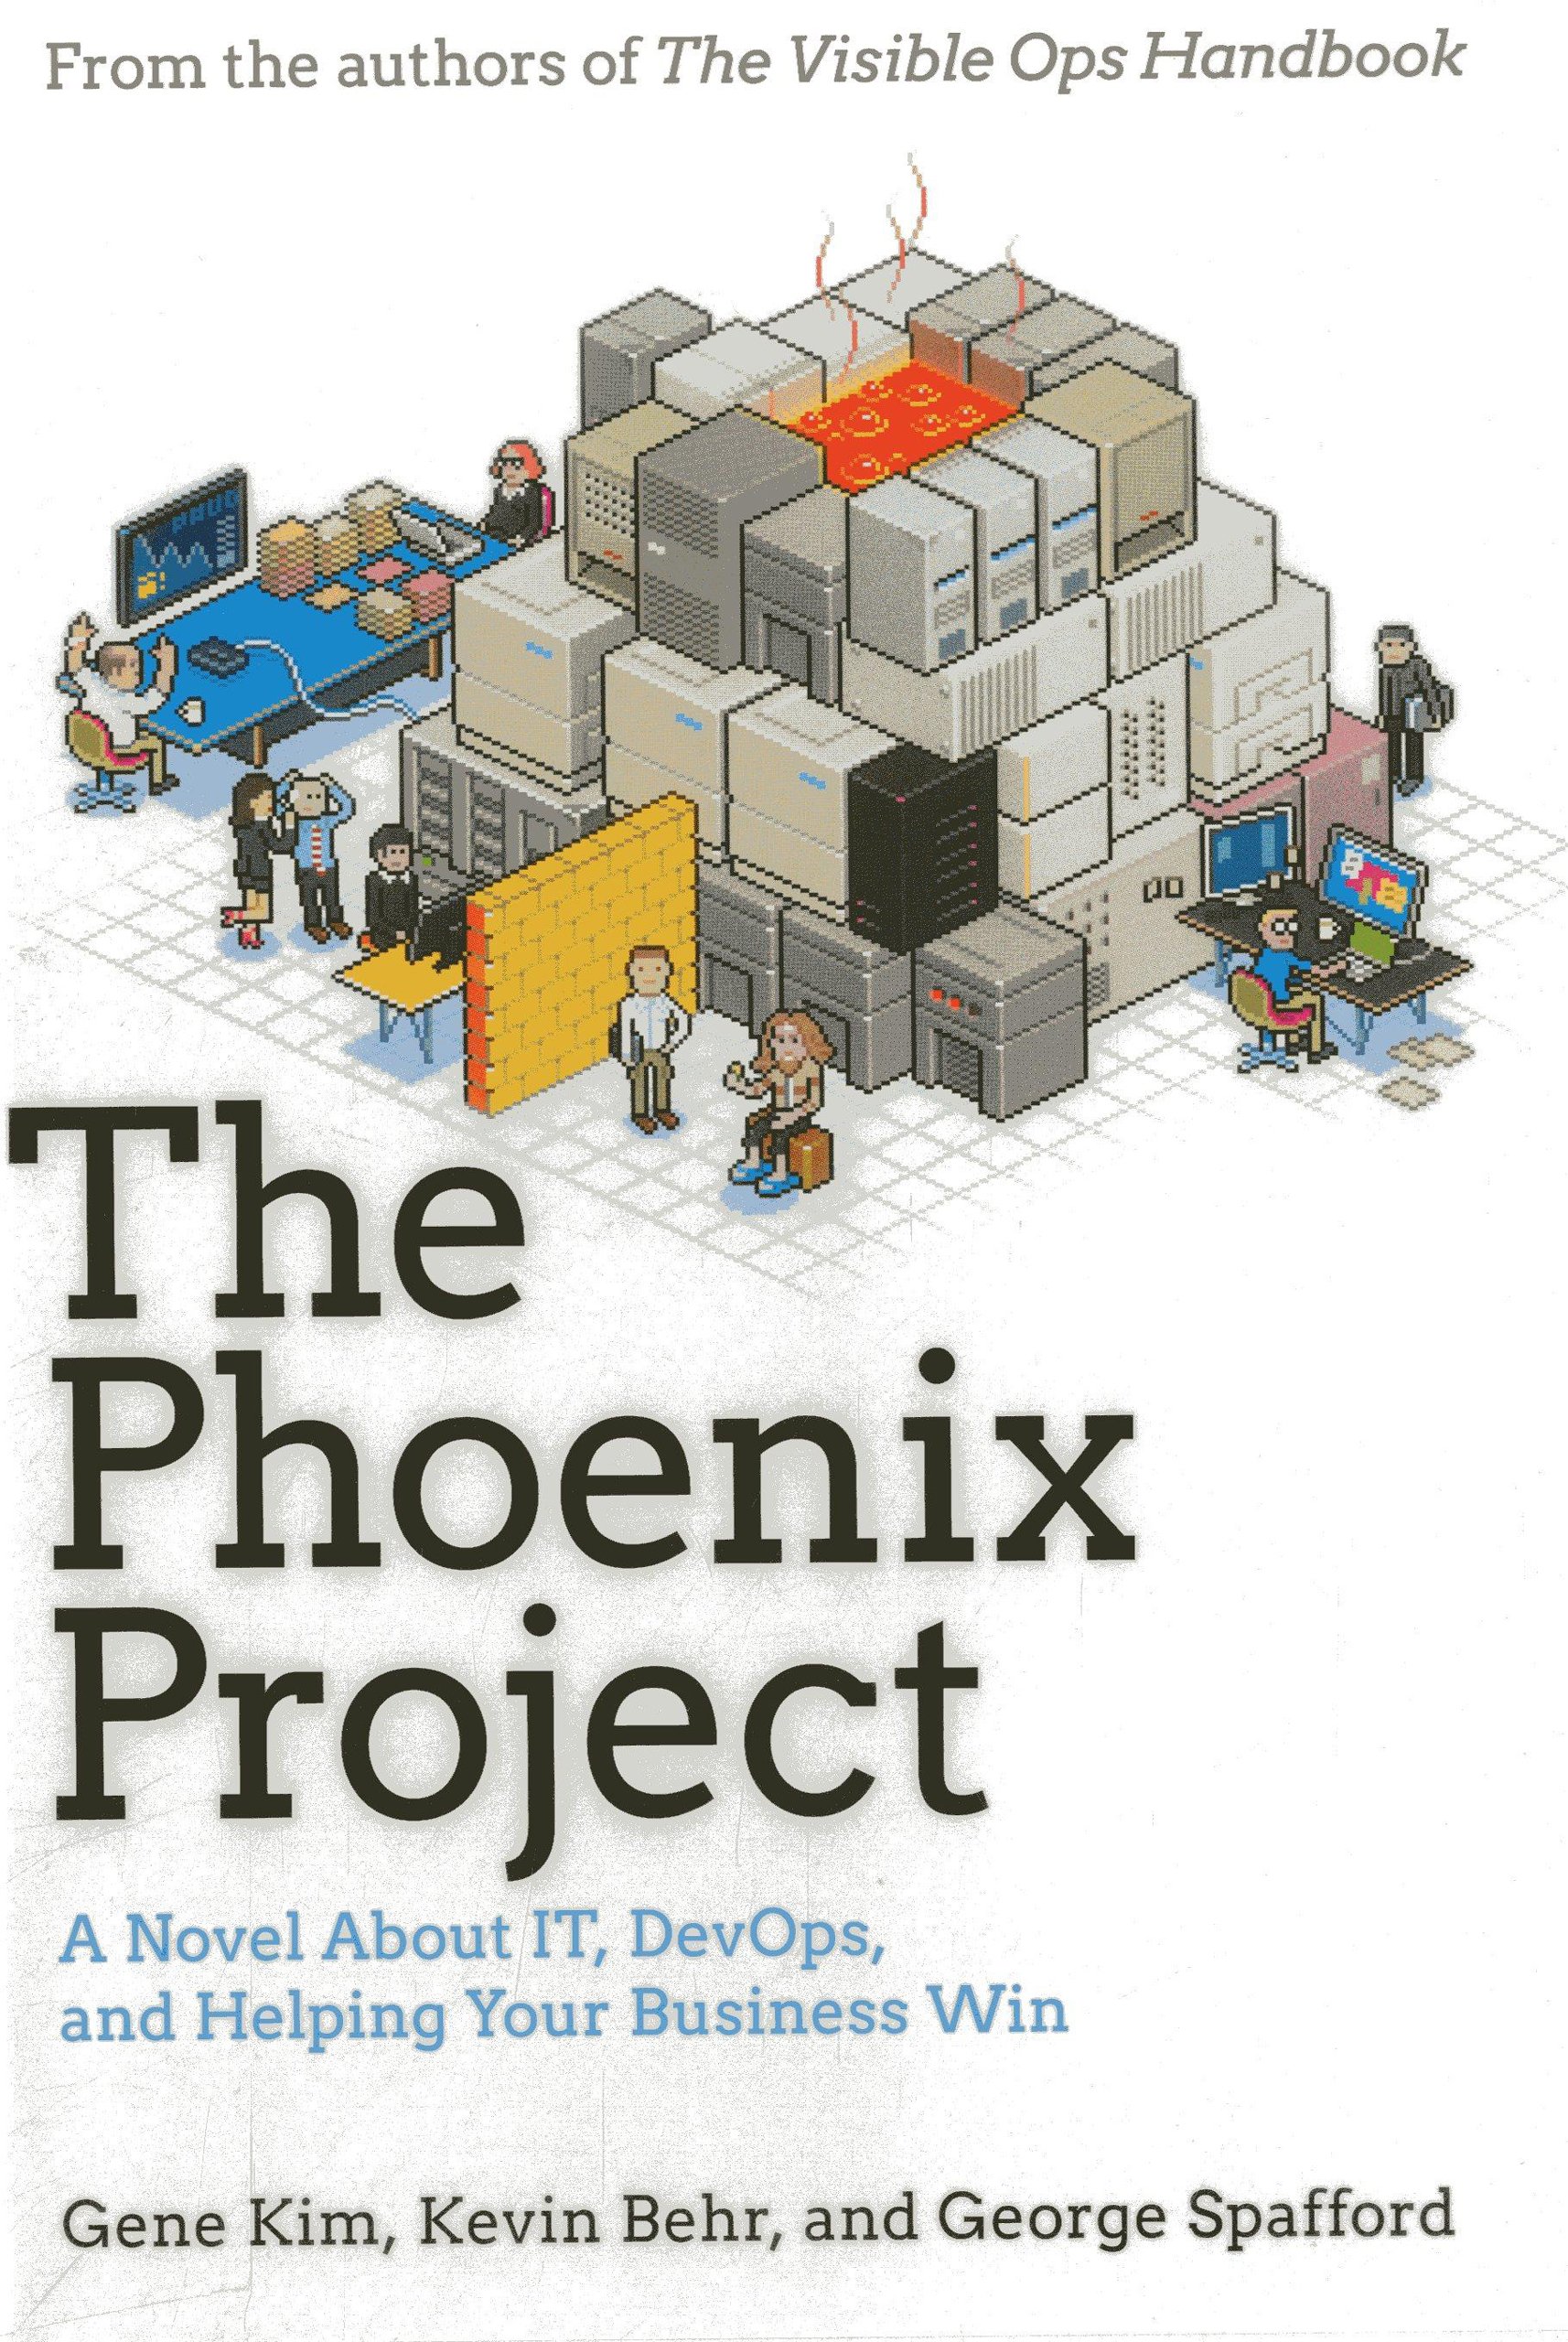 The Phoenix Project [Book Cover]